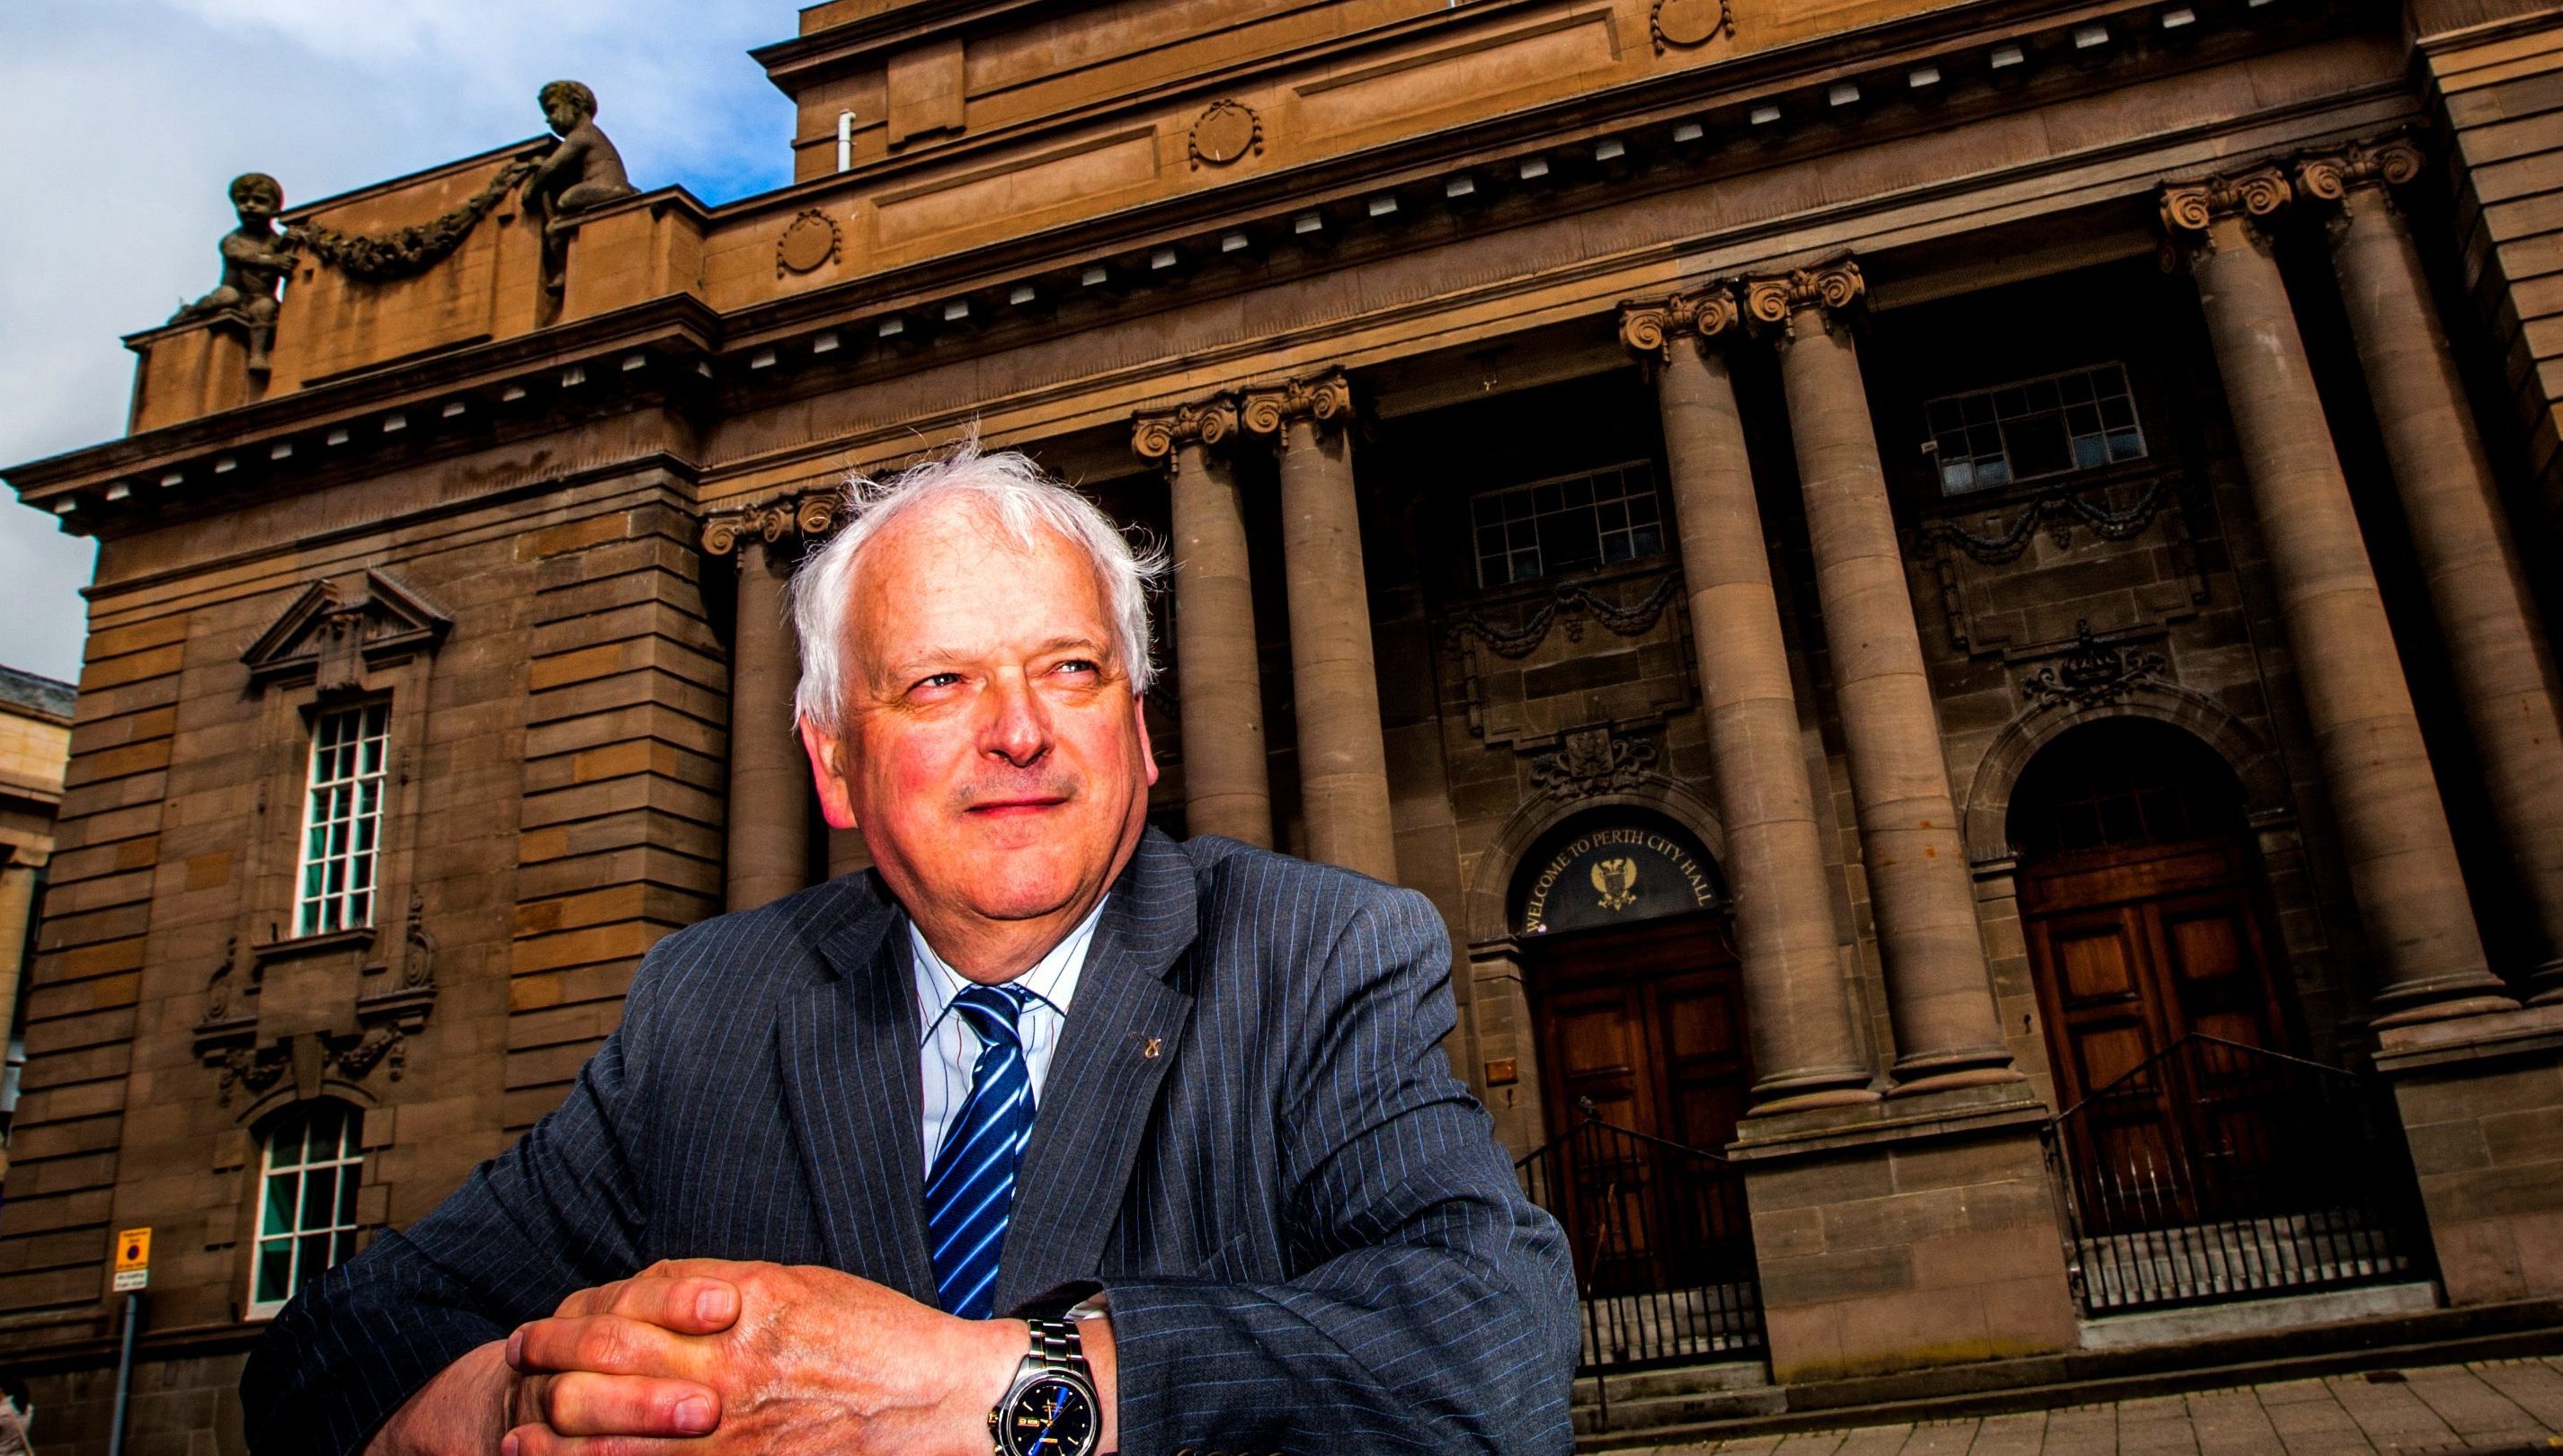 Council leader Ian Miller outside Perth City Hall.